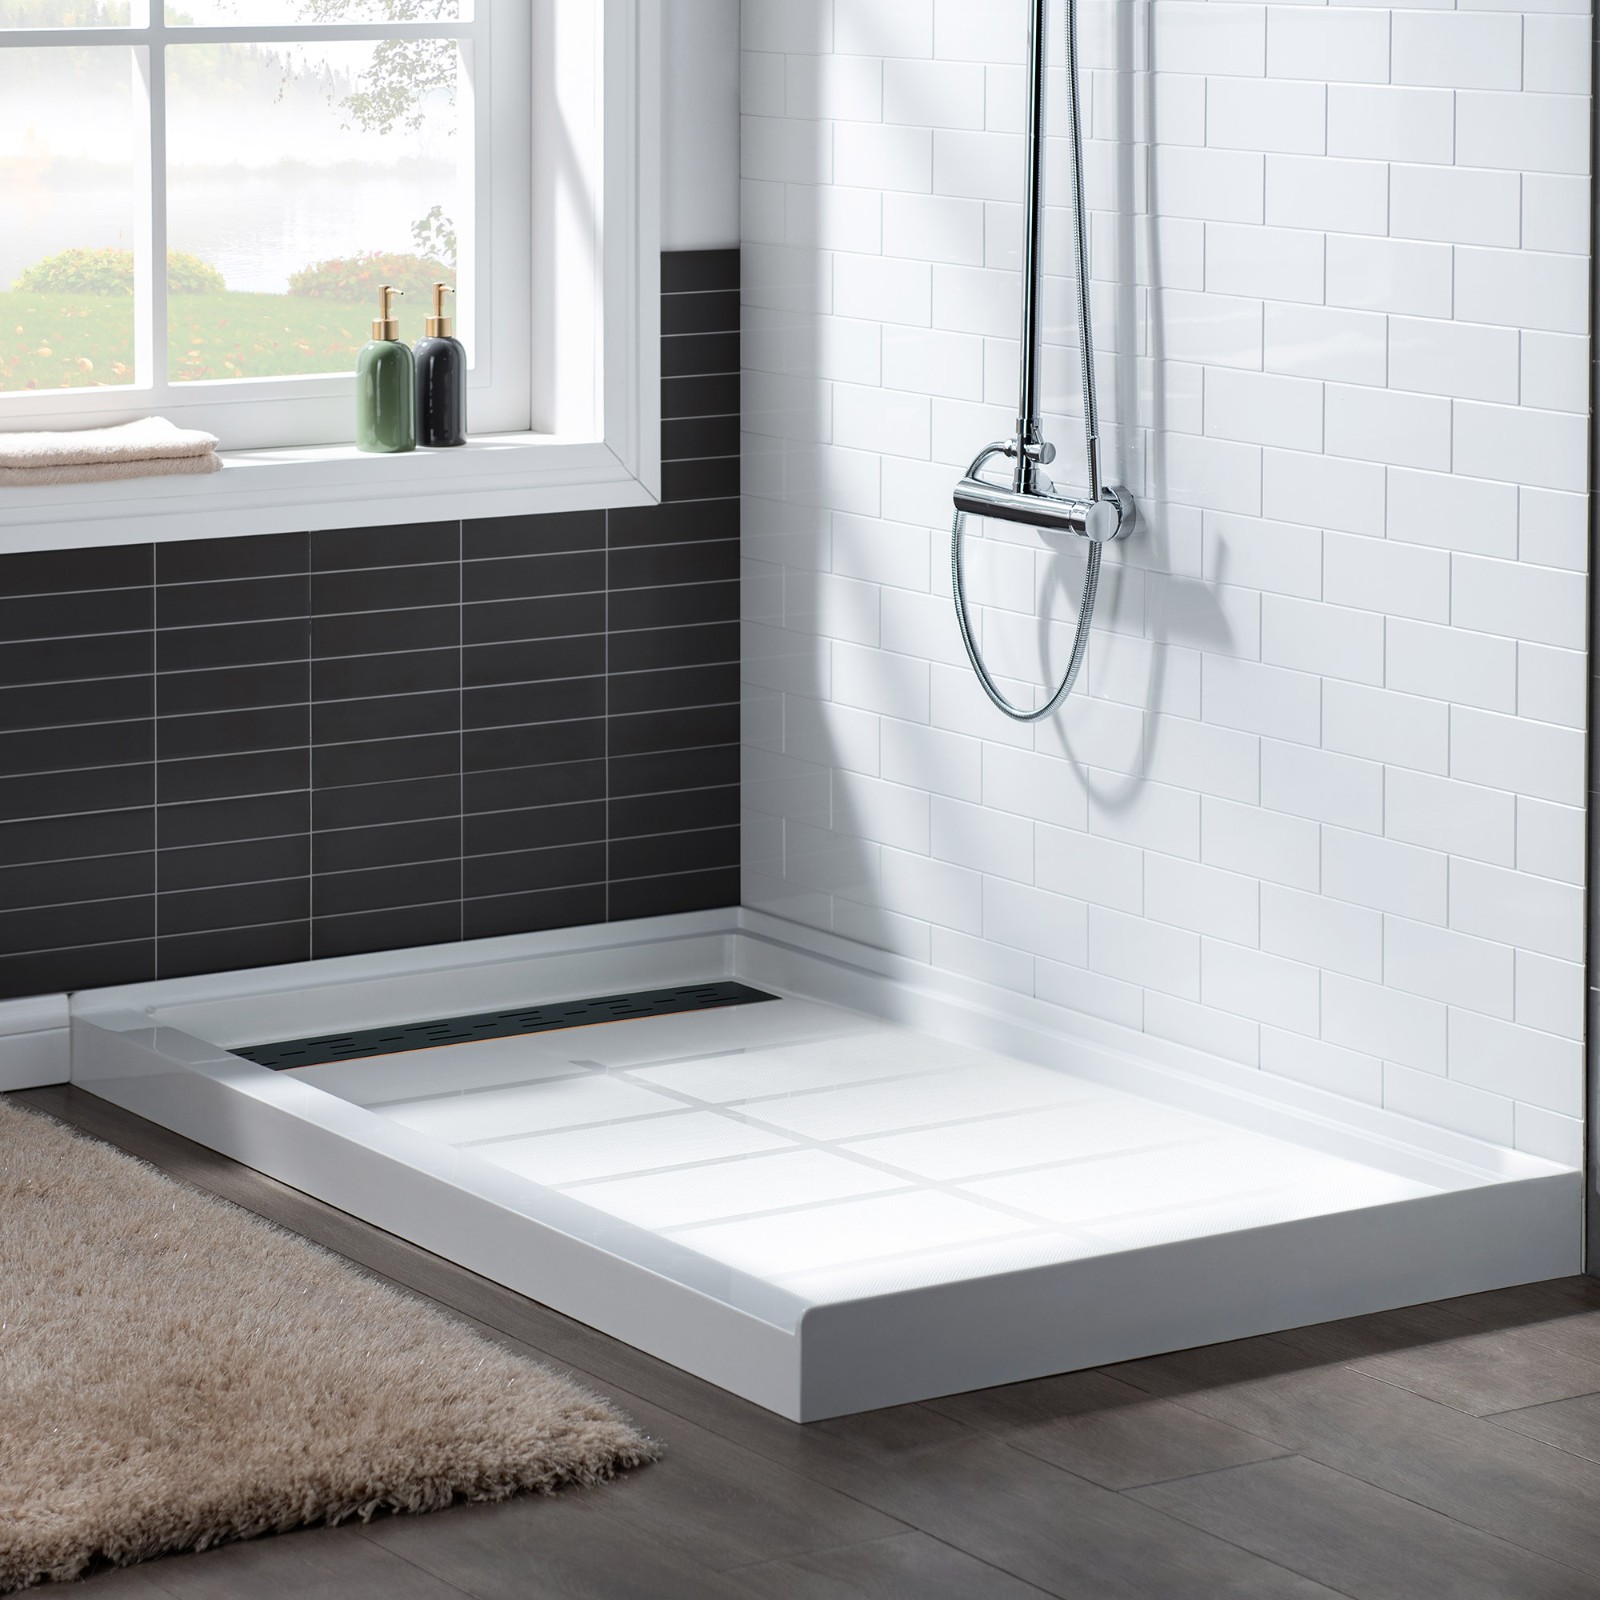  WOODBRIDGE SBR4832-1000L-ORB SolidSurface Shower Base with Recessed Trench Side Including Oil Rubbed Bronze Linear Cover, 48